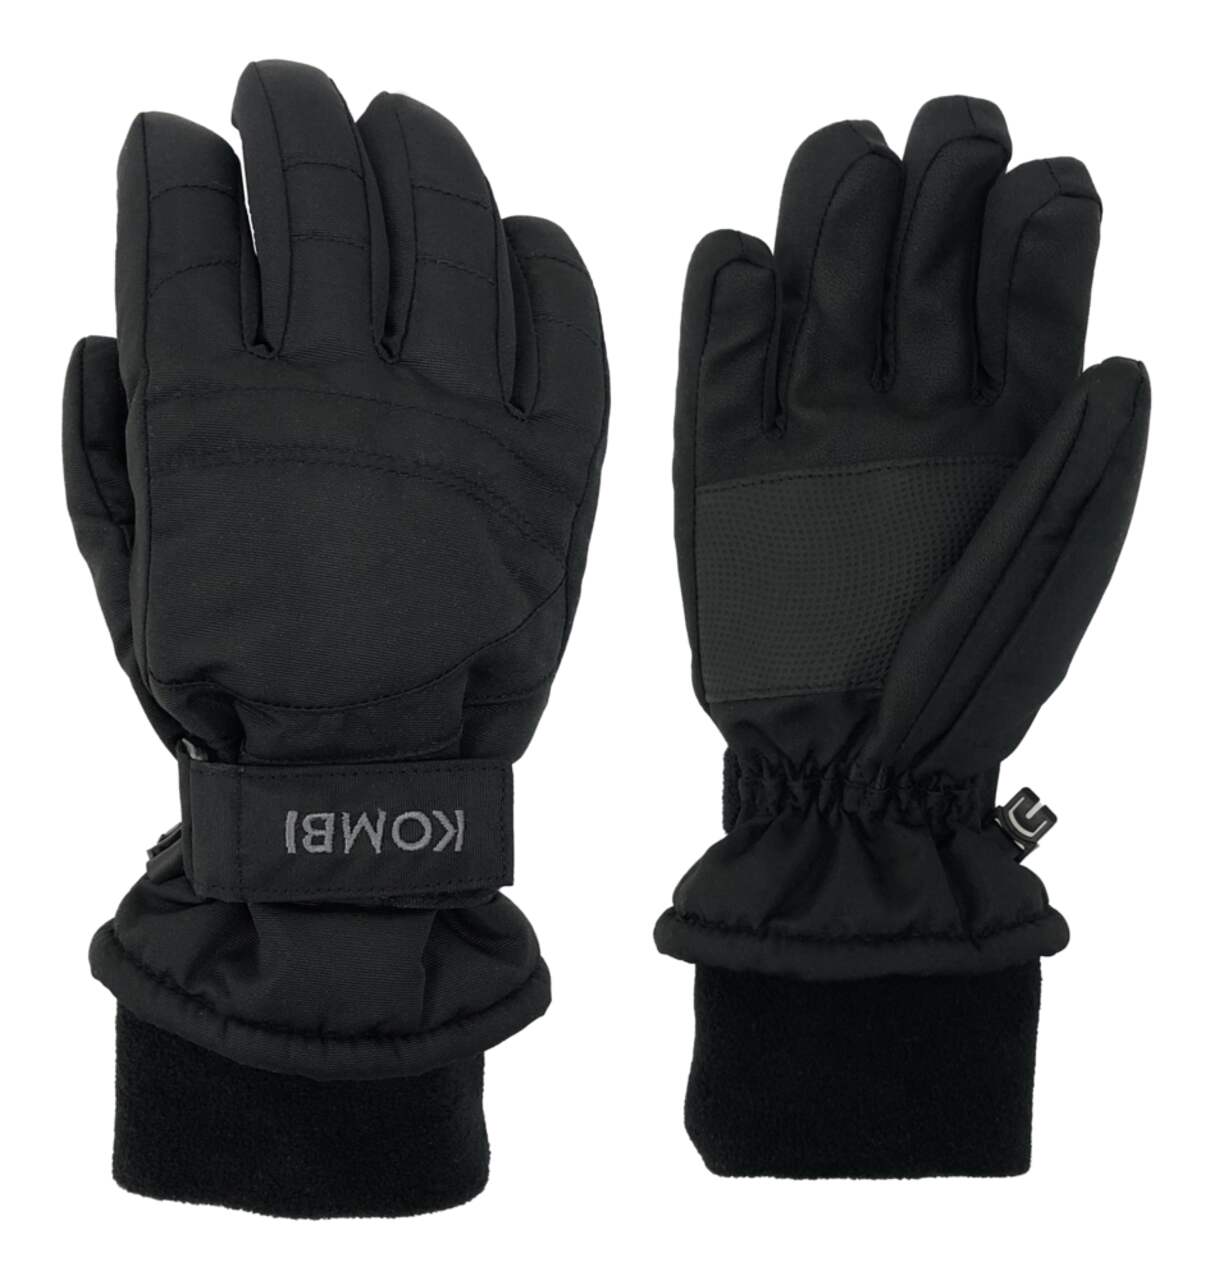 https://media-www.canadiantire.ca/product/playing/footwear-apparel/winter-footwear-apparel/1870848/kombi-glove-yth-m-f41be3c1-8372-4229-9e74-38d3404df036.png?imdensity=1&imwidth=640&impolicy=mZoom